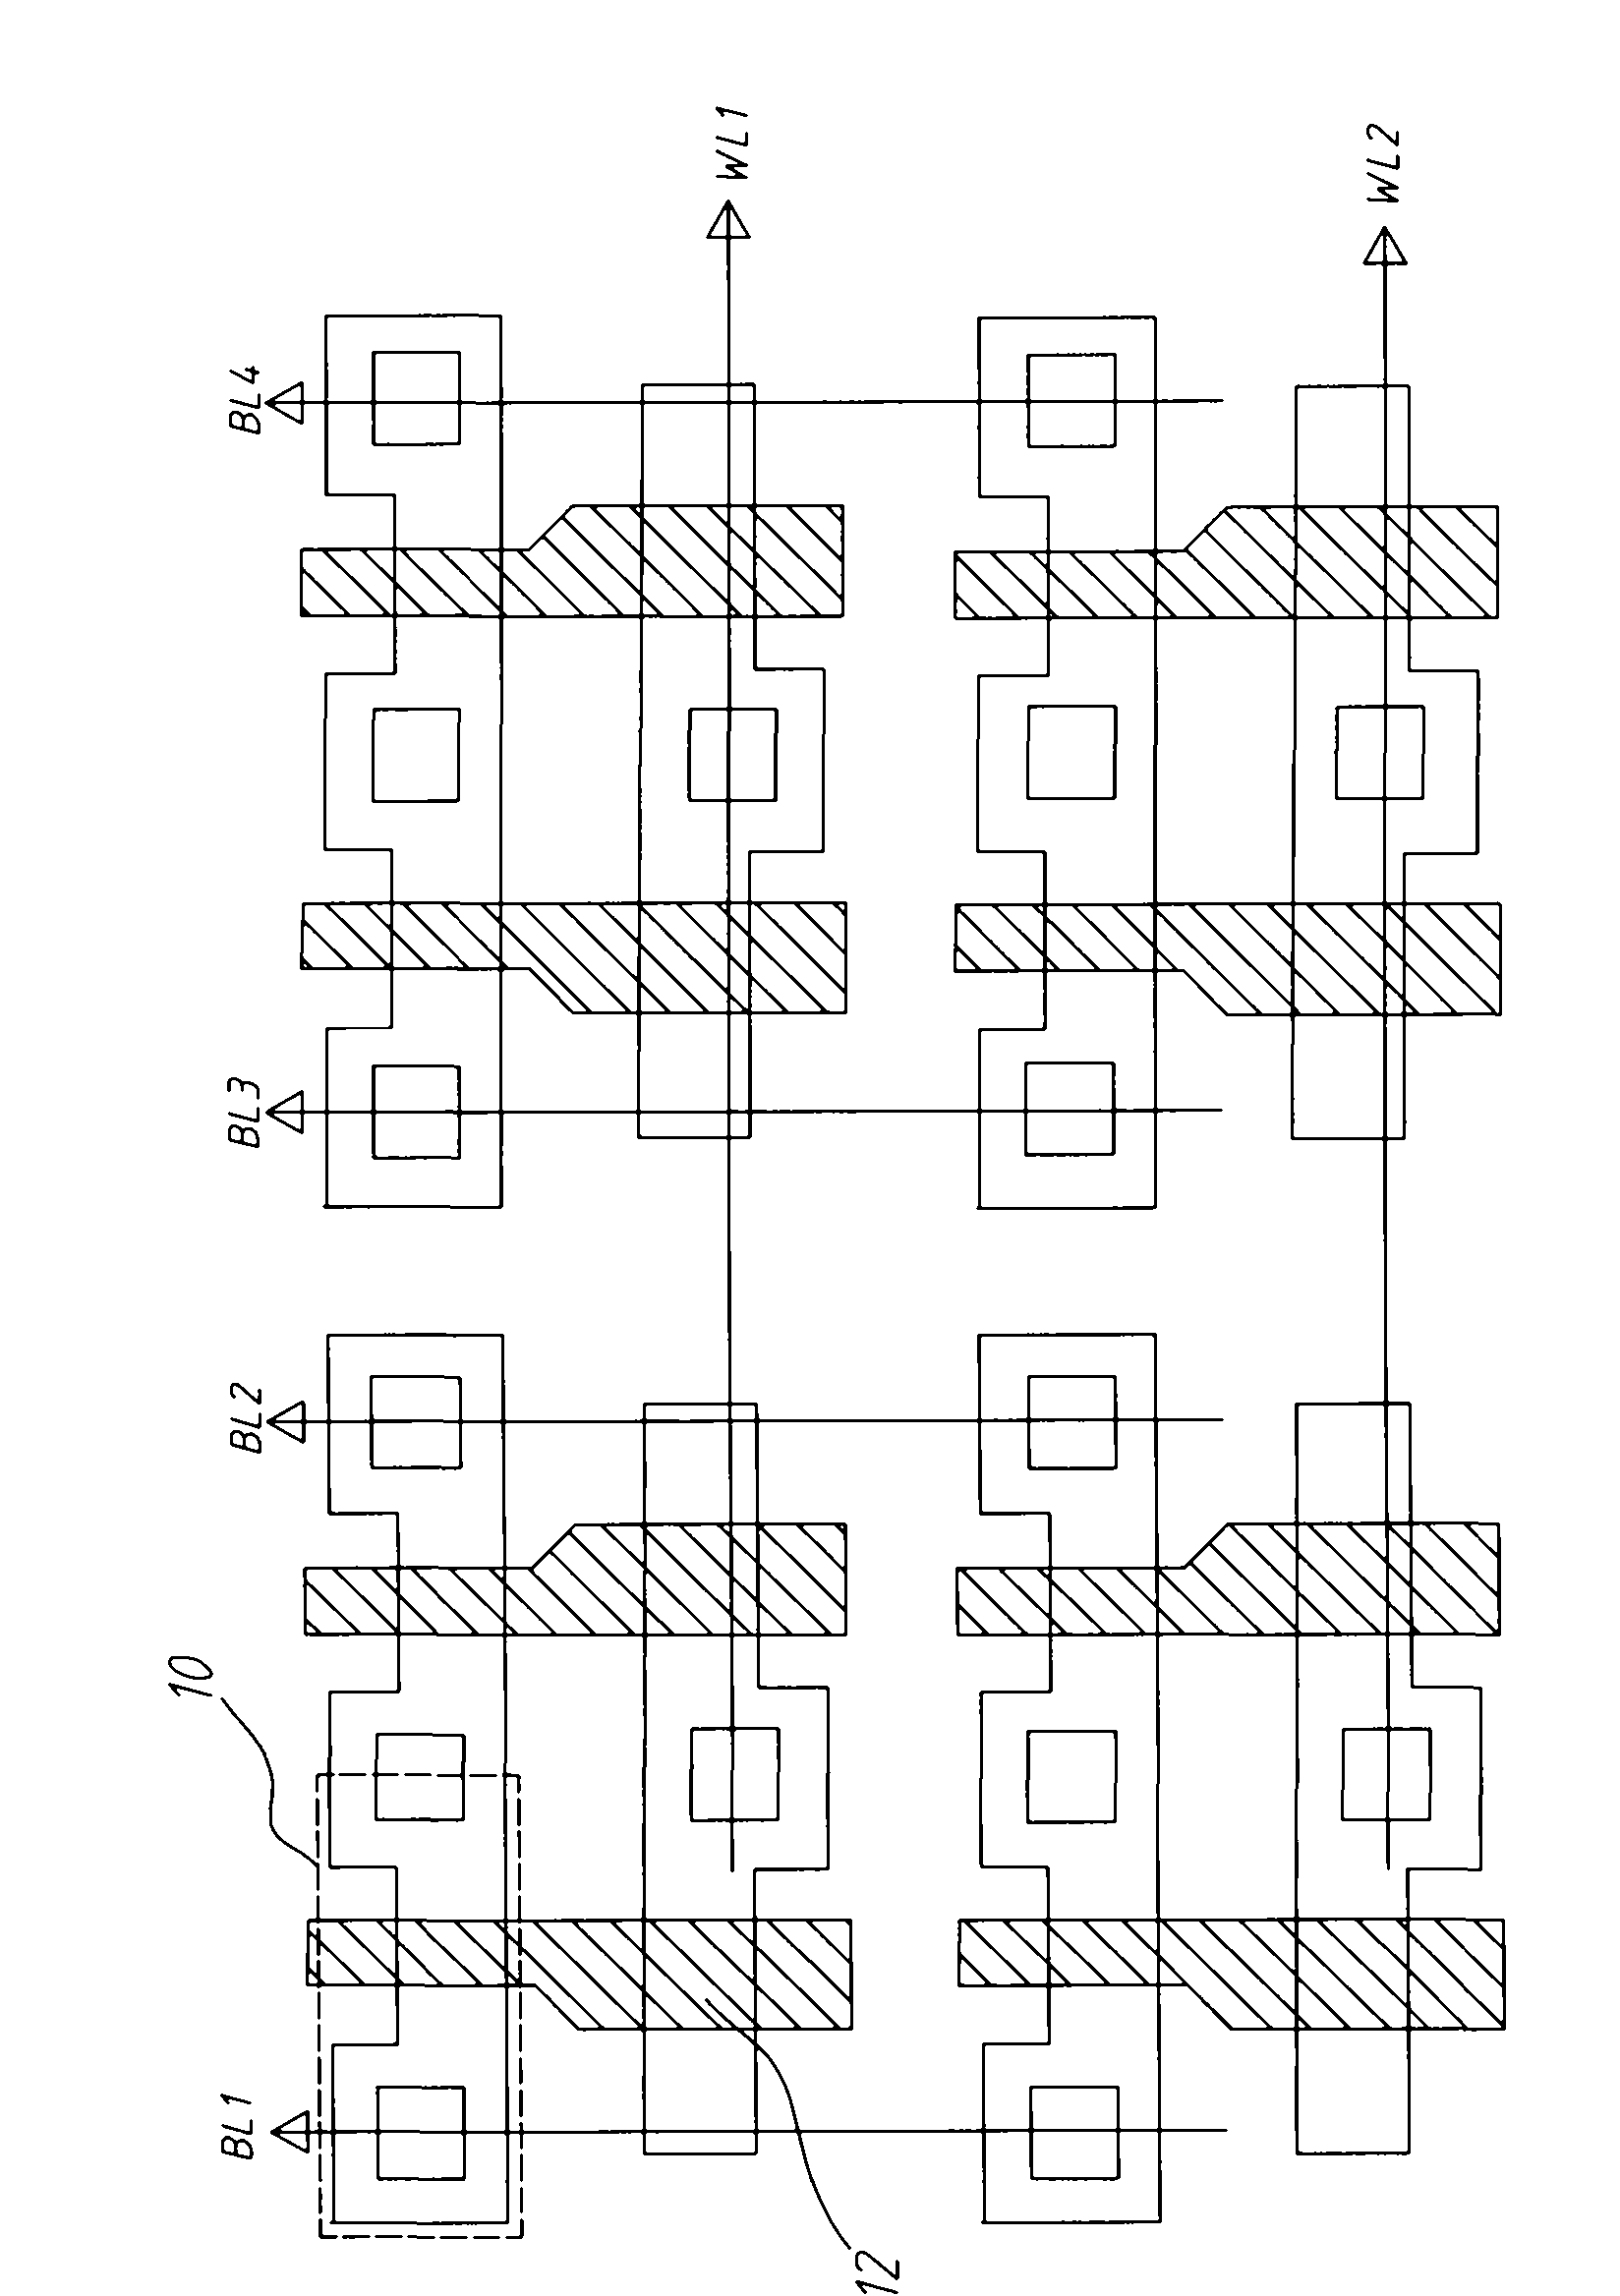 Small area electrically removing type rewritable read only memory array